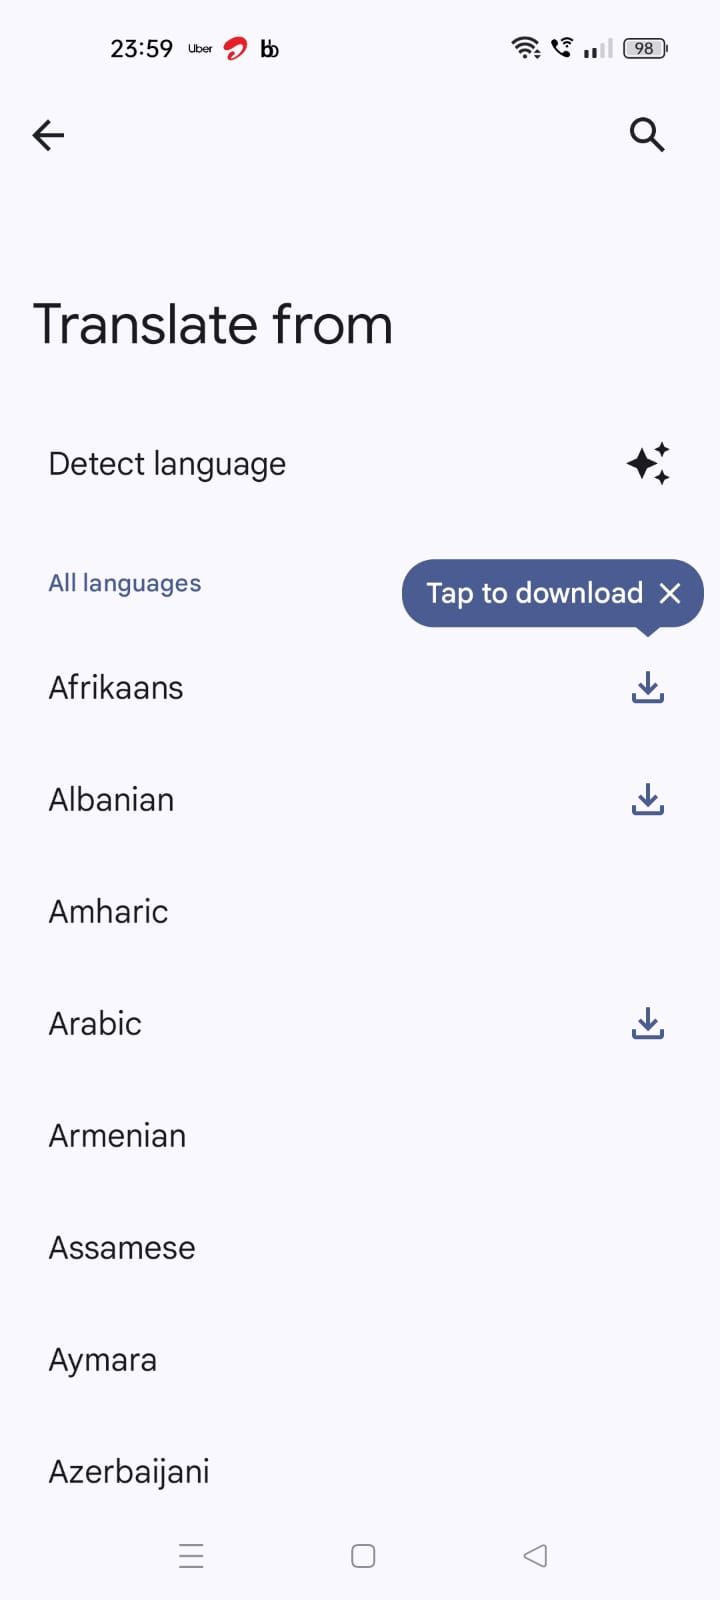 Screenshot showing the languages available in the Google Translate app